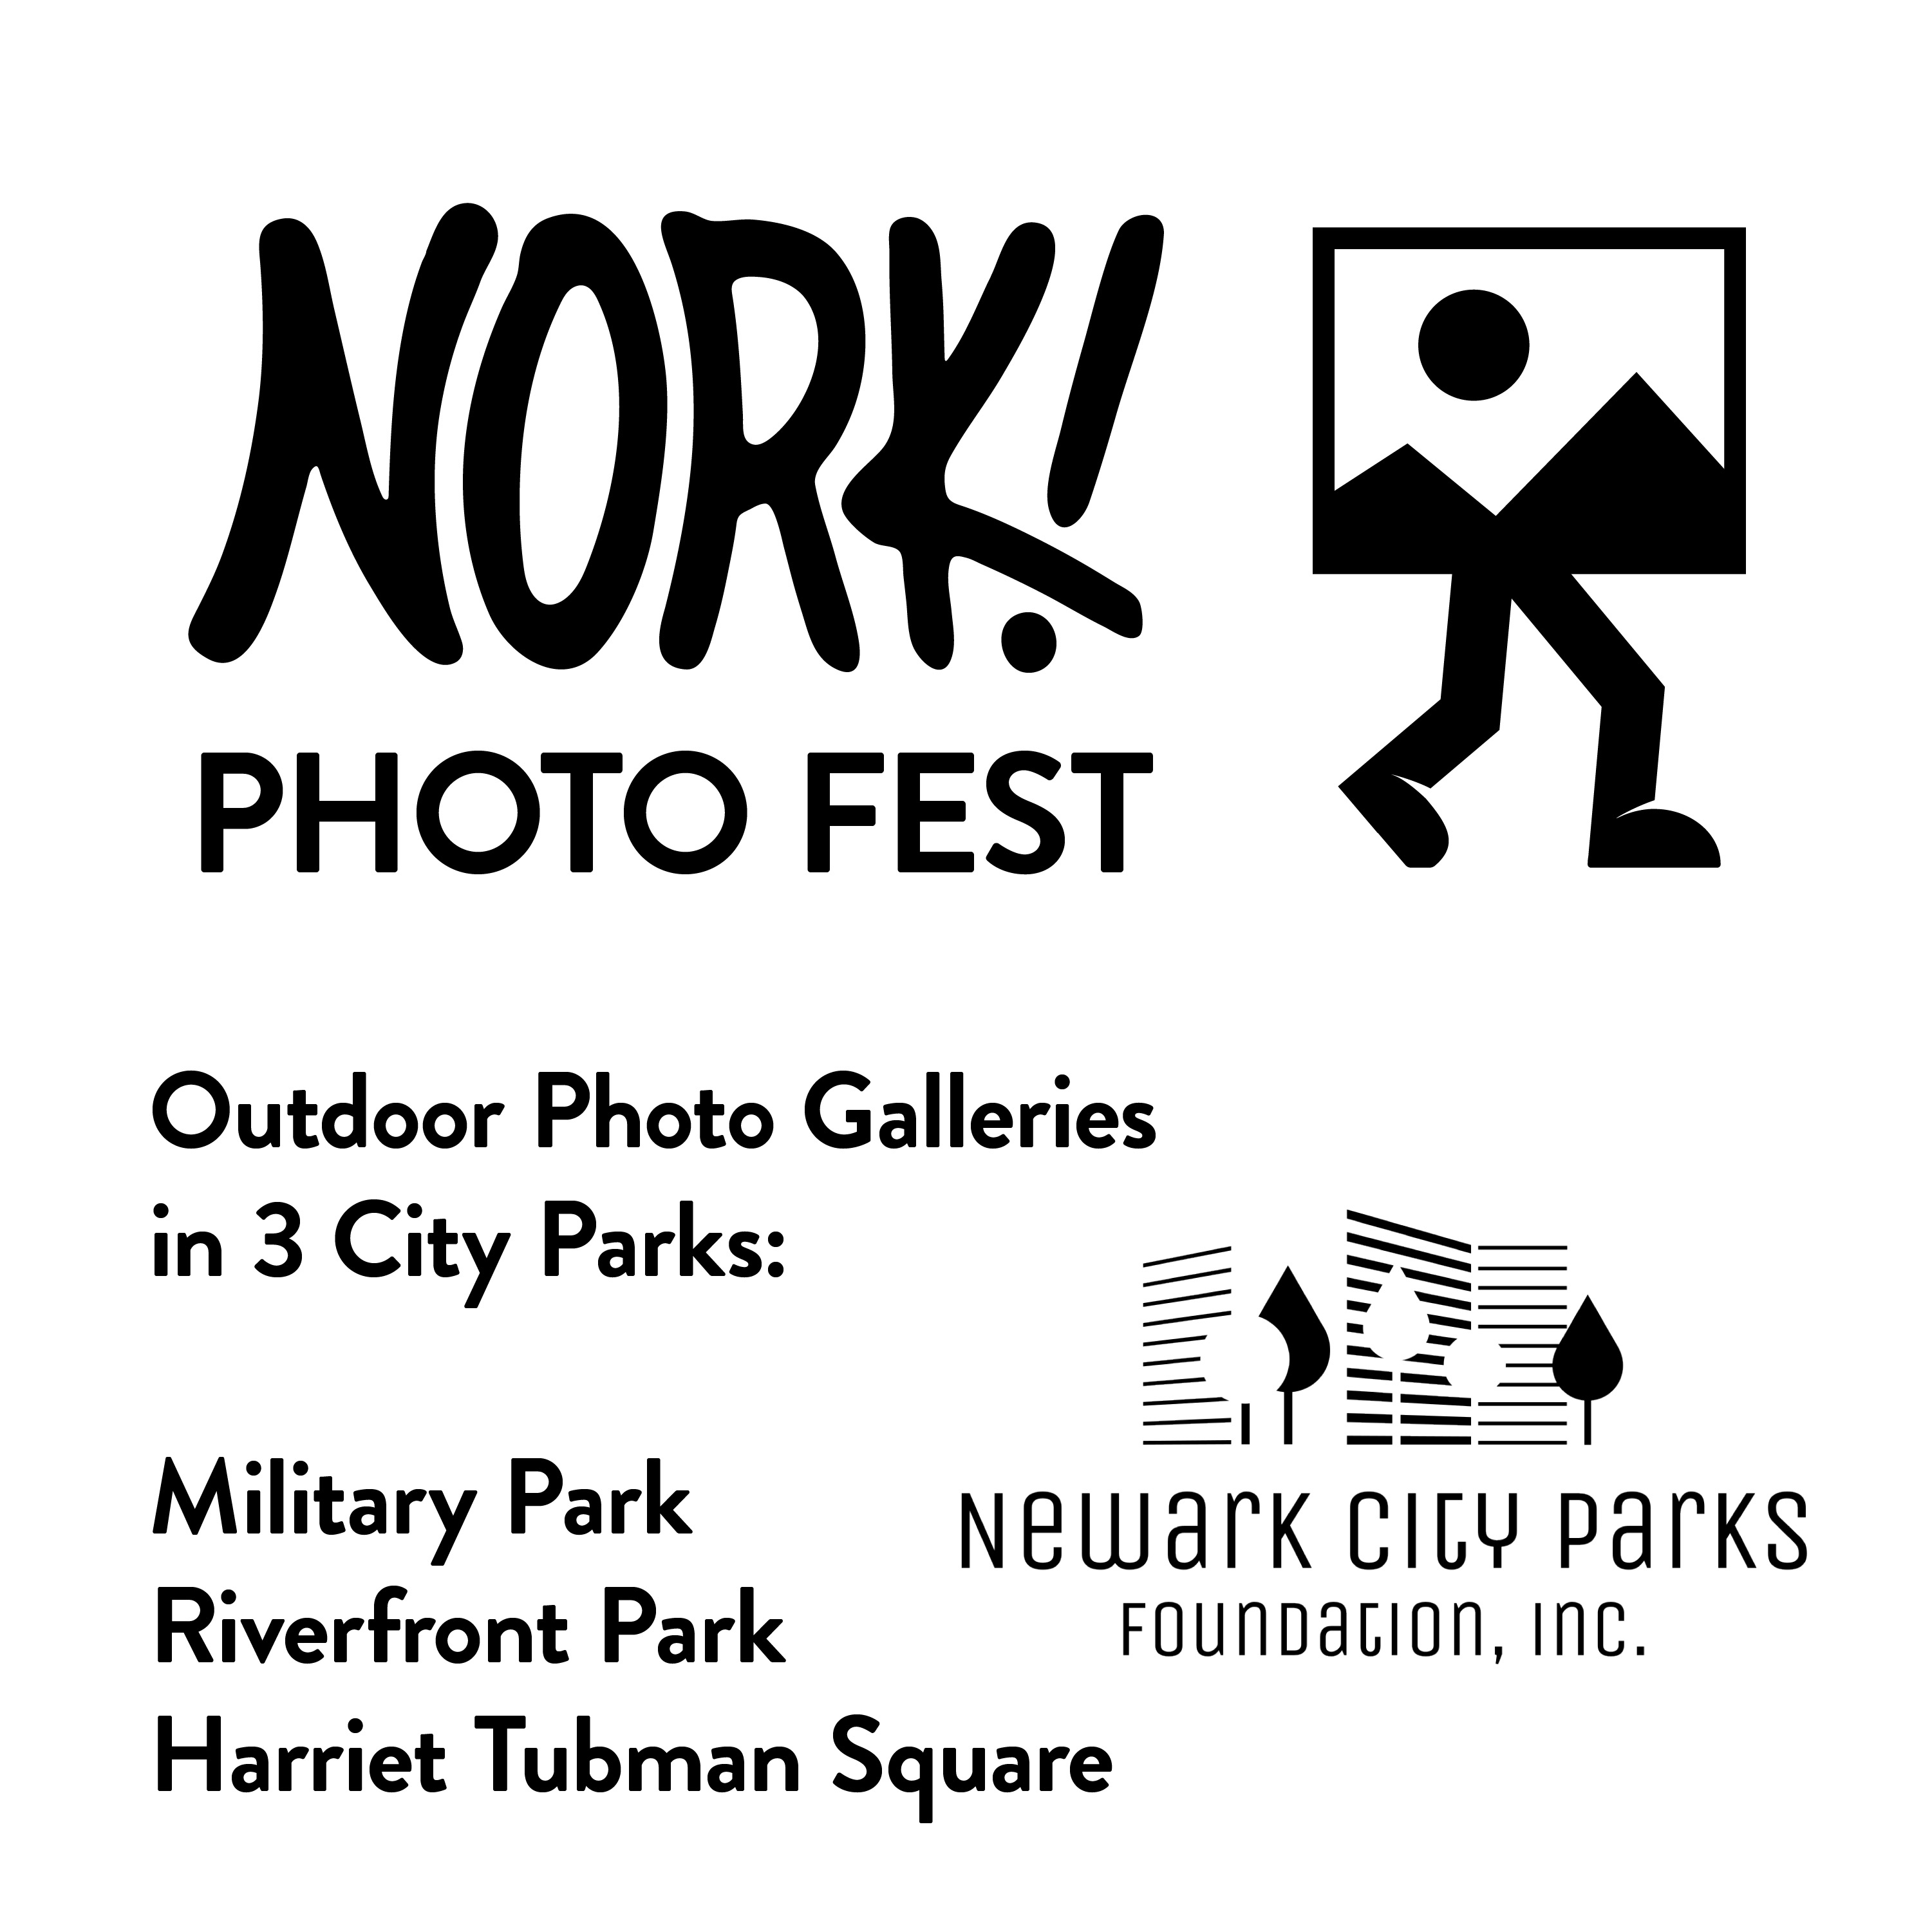 The Nork Project's Photo Fest promo image